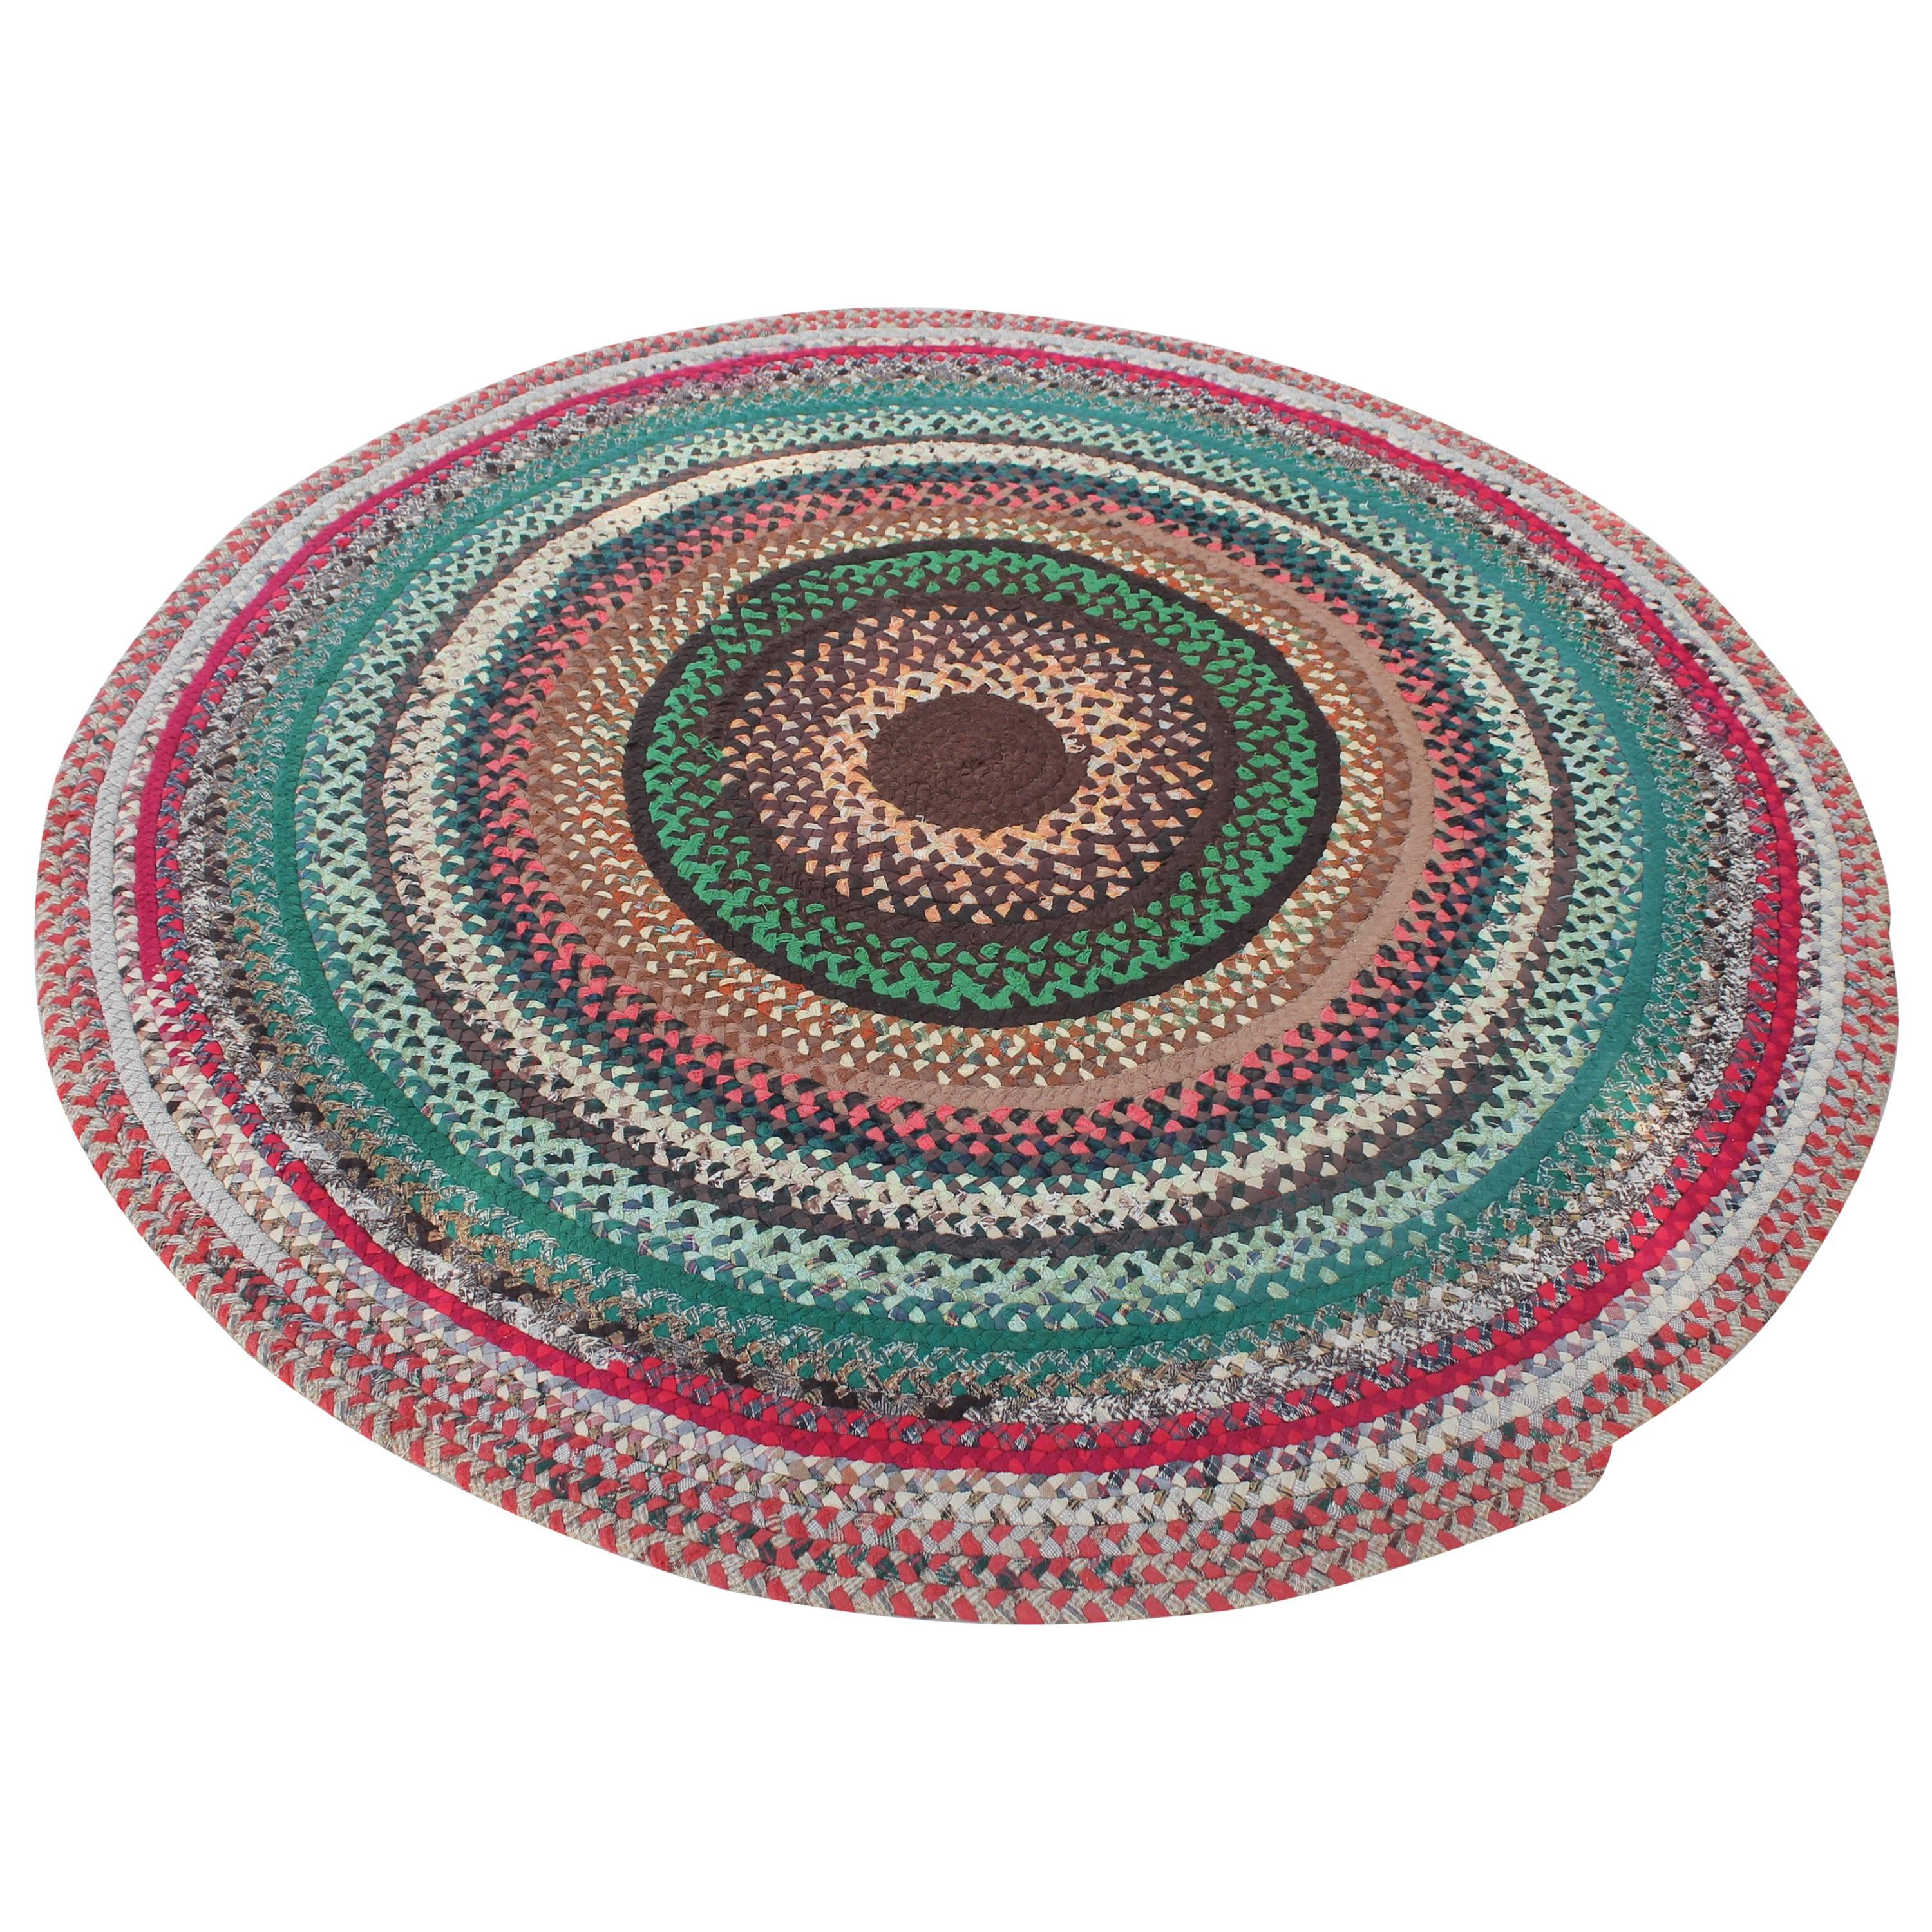 Early 20th Century Braided Round Rug